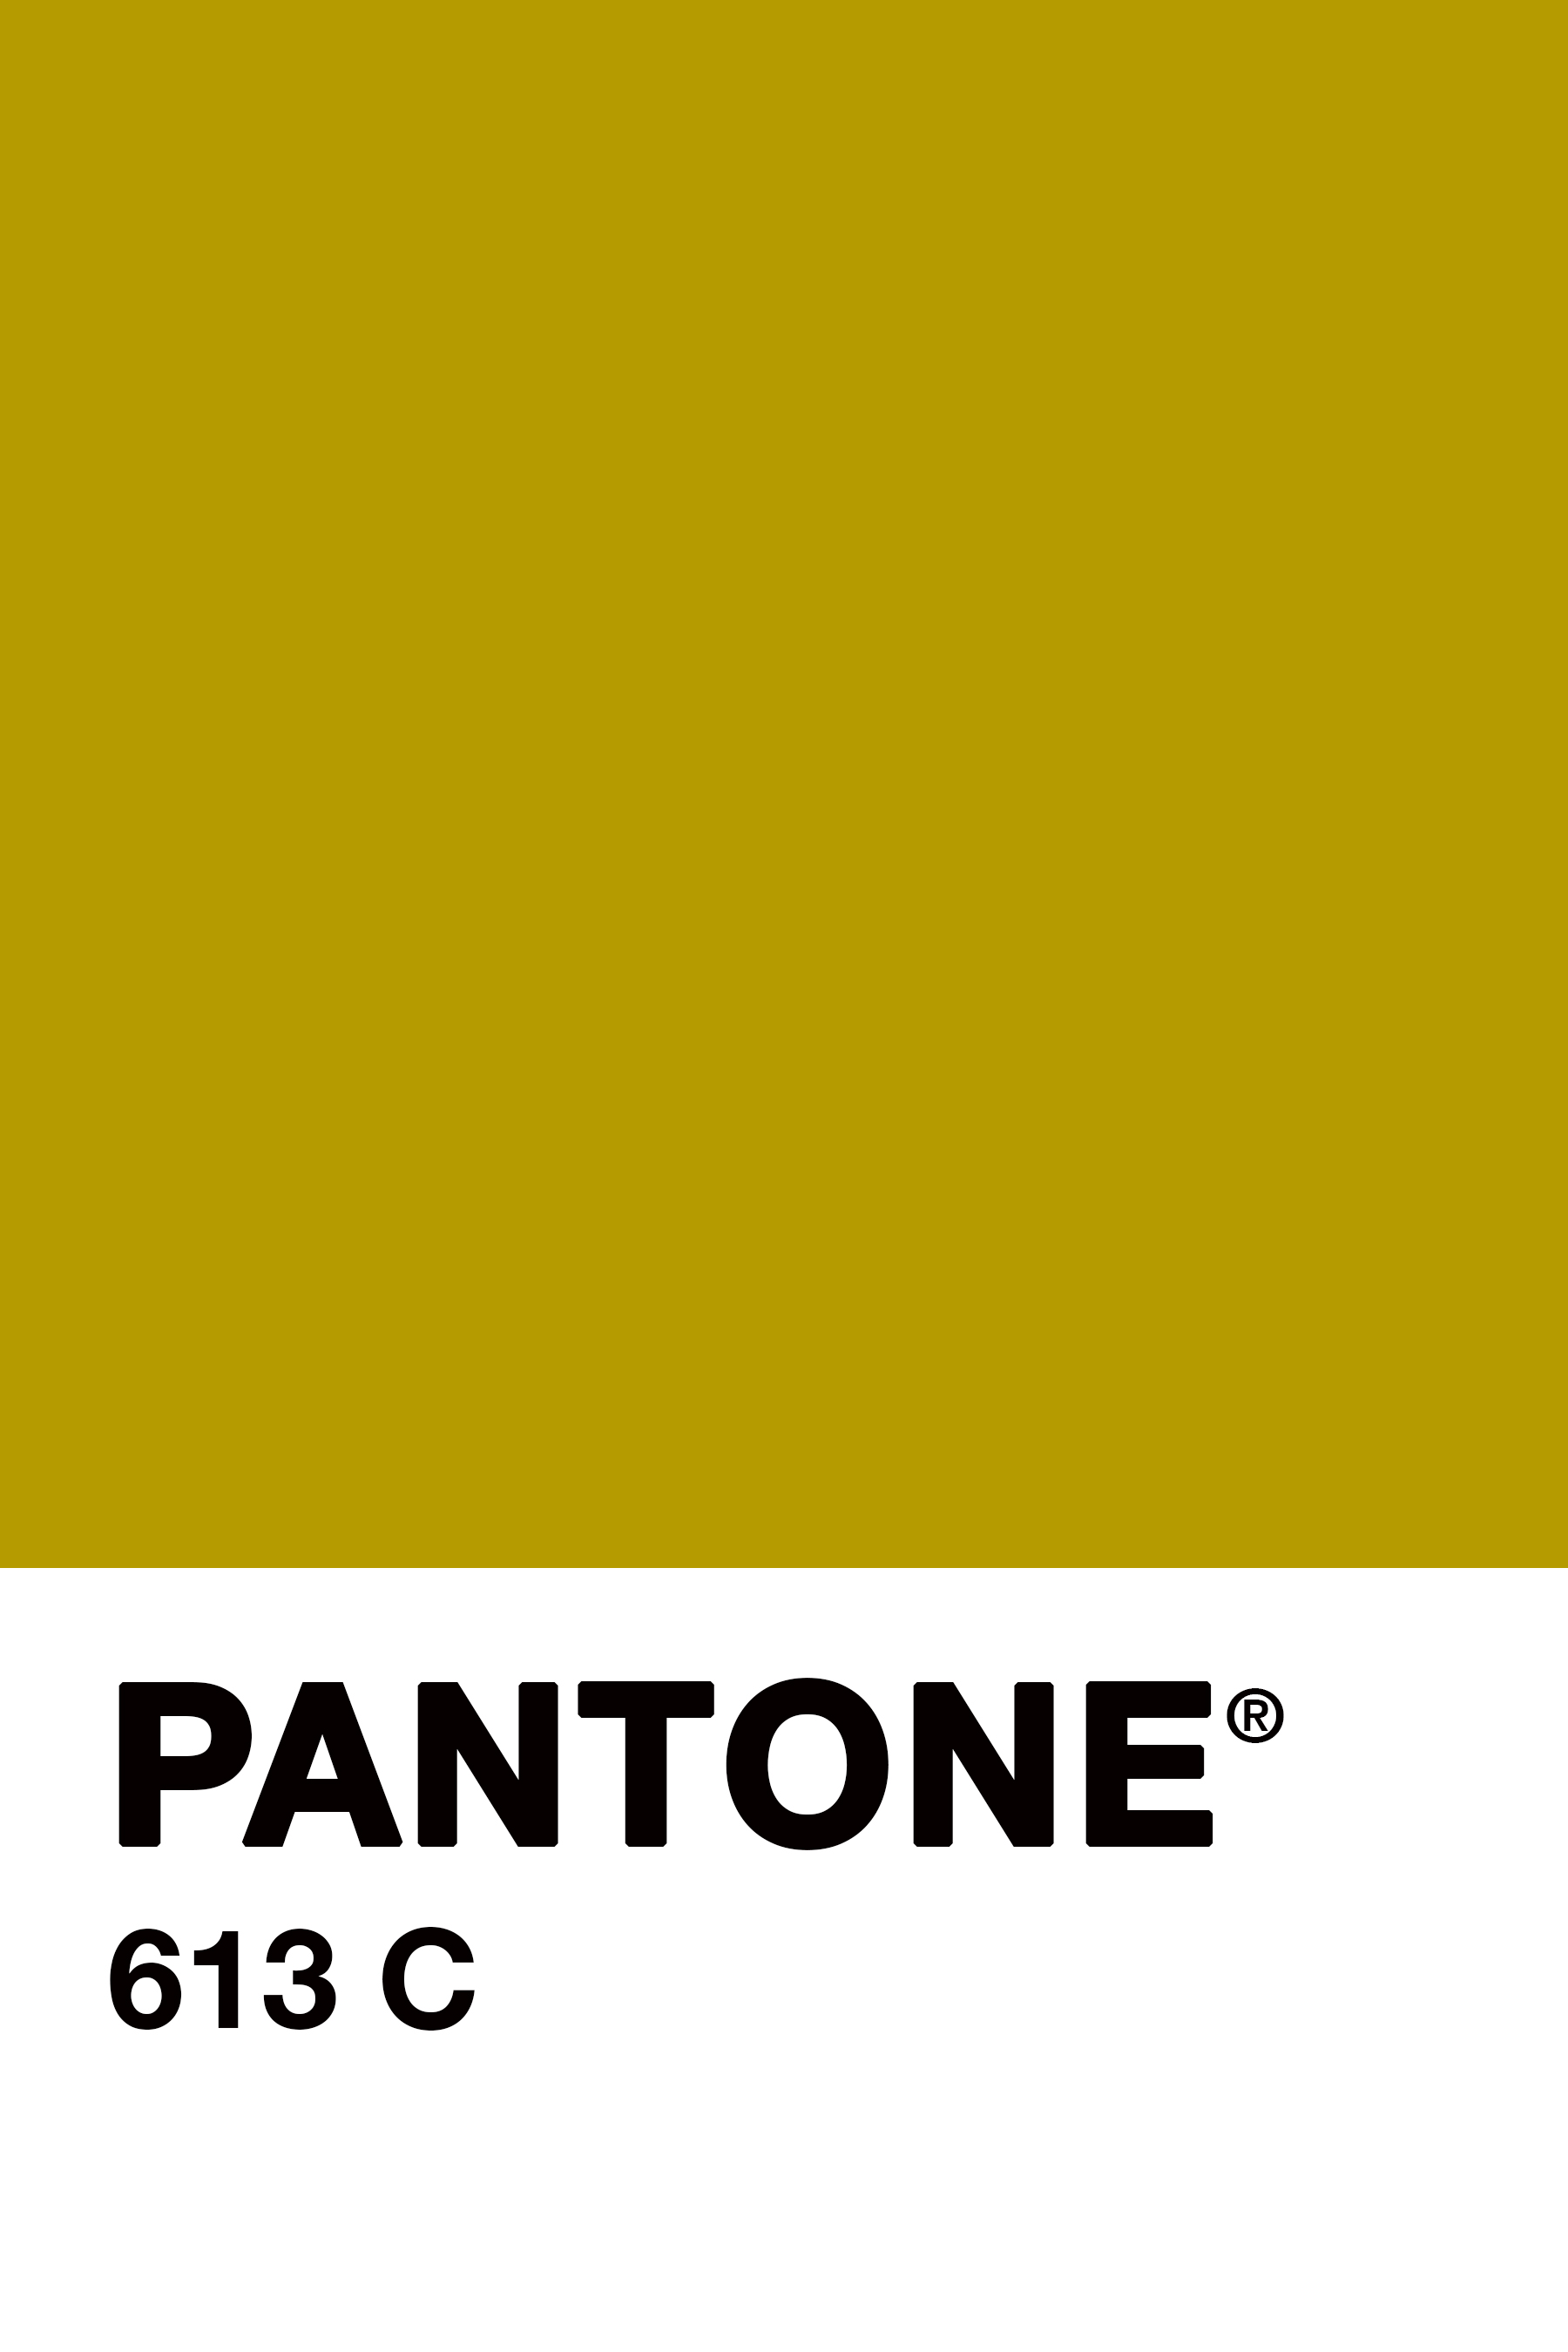 Sur Twitter Colouroftheday March2nd Pantone 613c A Mondaymotivation Colour For A Seemingly Disgusting Coffee Moodcolour Colourinspires T Co Gadkrtqhlp Twitter